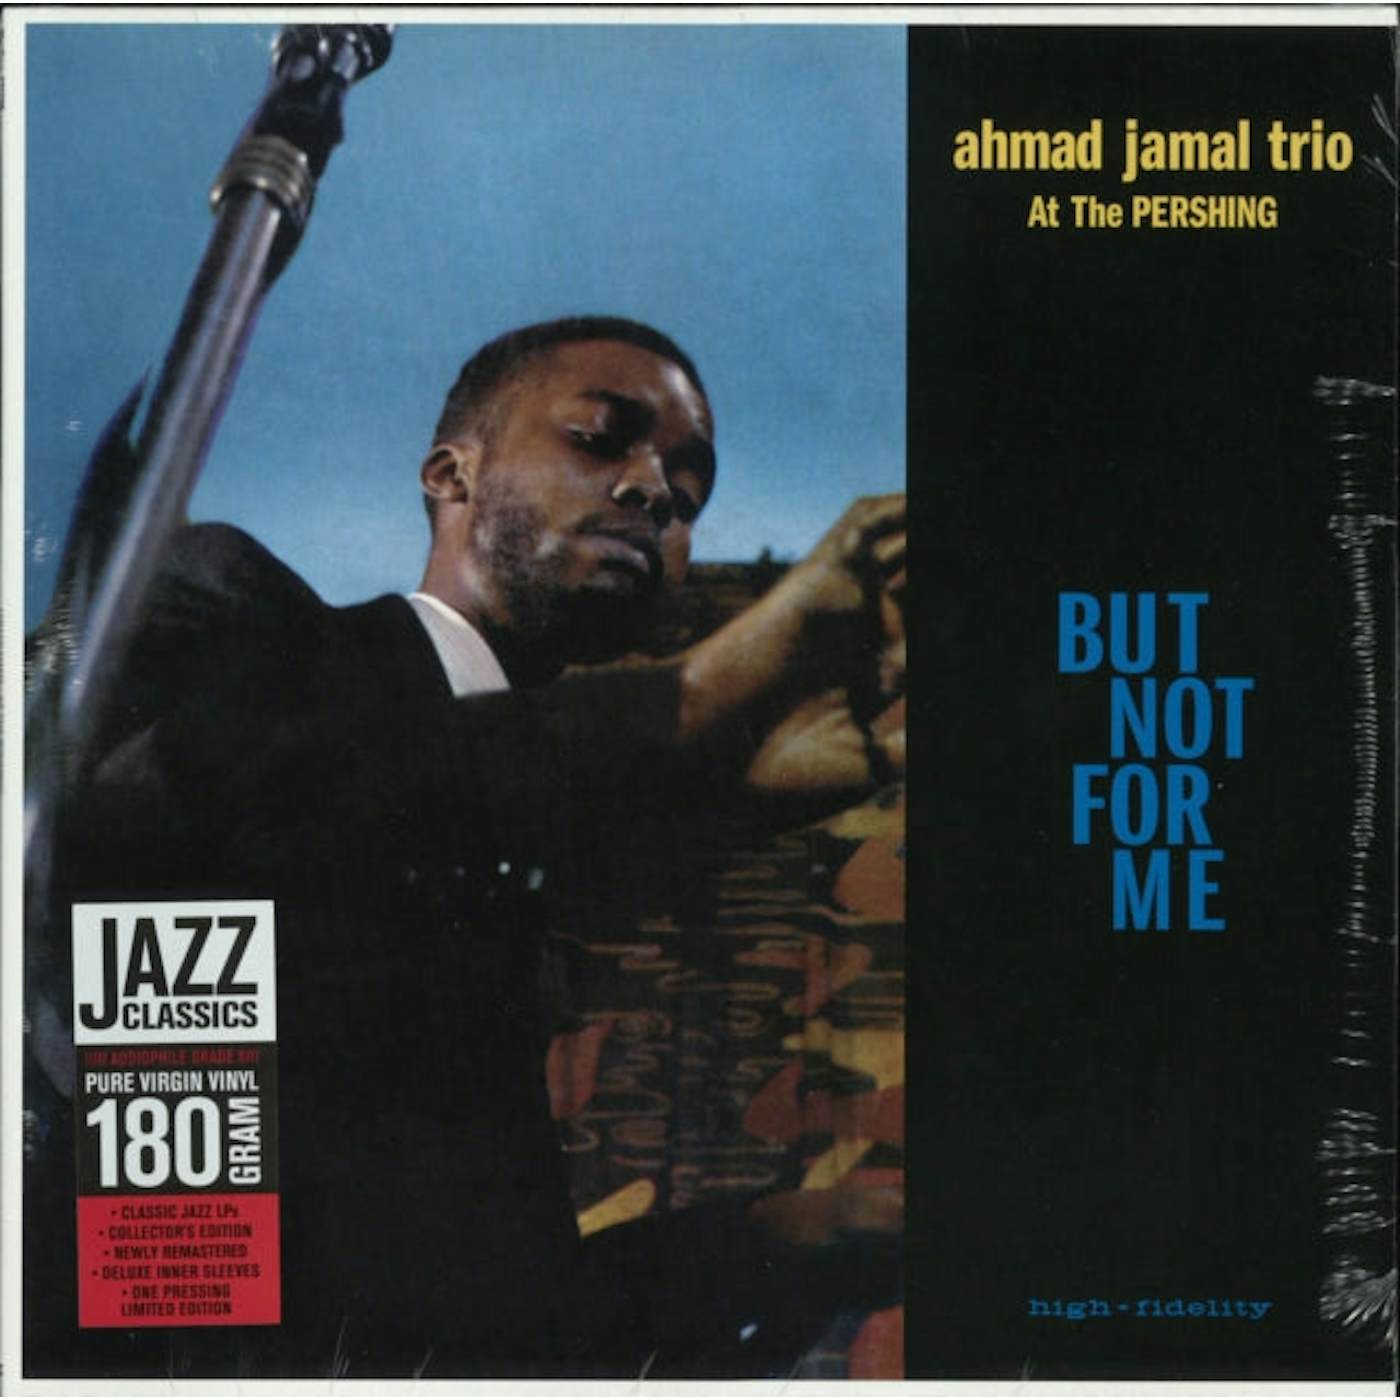 Ahmad Jamal LP Vinyl Record  Live At The Pershing Lounge 19 58 (But Not For Me)